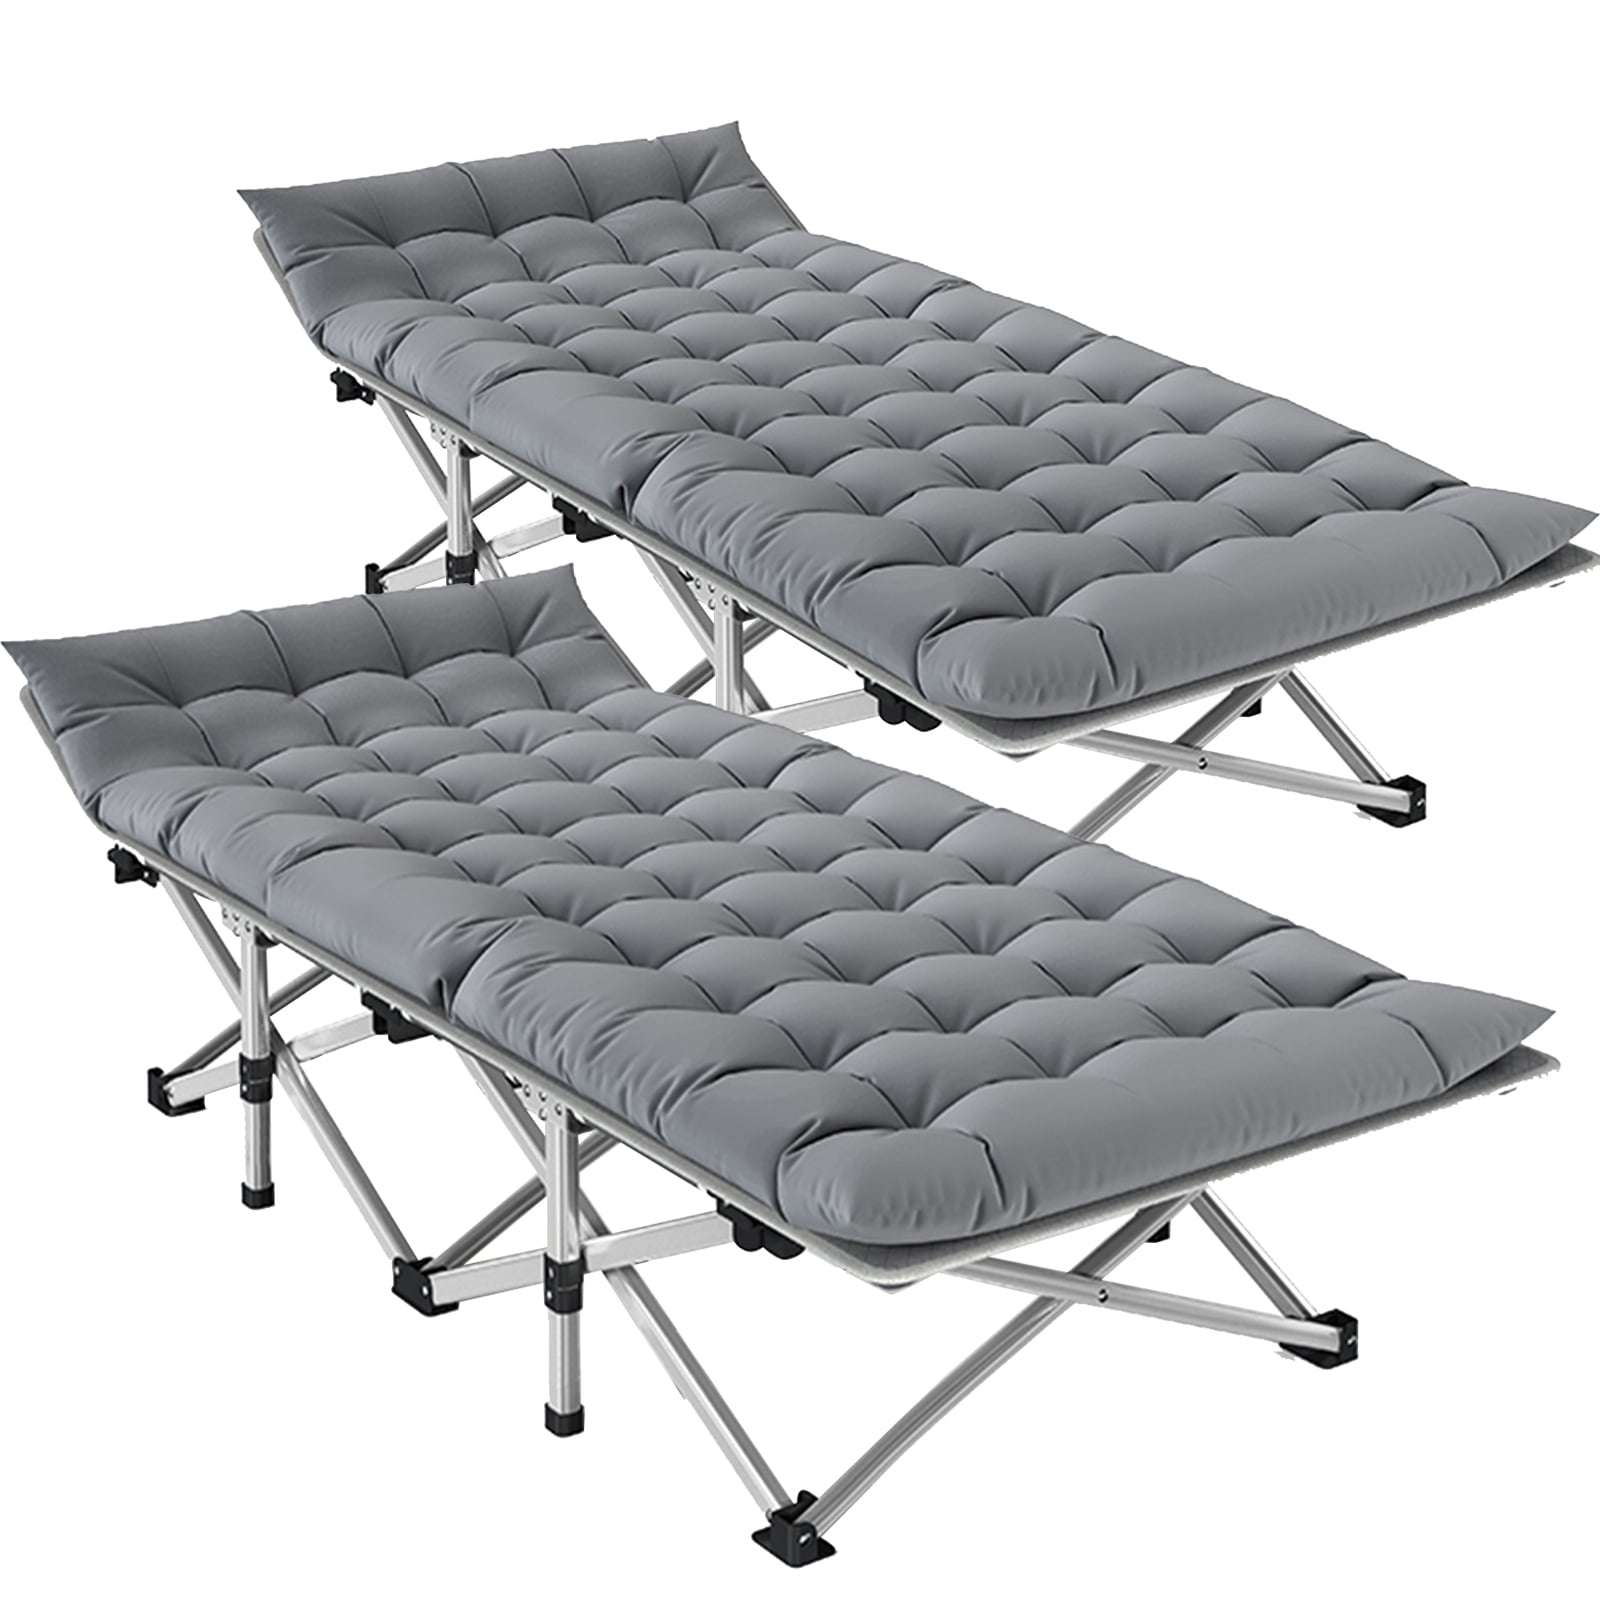 Adult Folding cot bed military bedding heavy duty folding bed with Carry Bag 